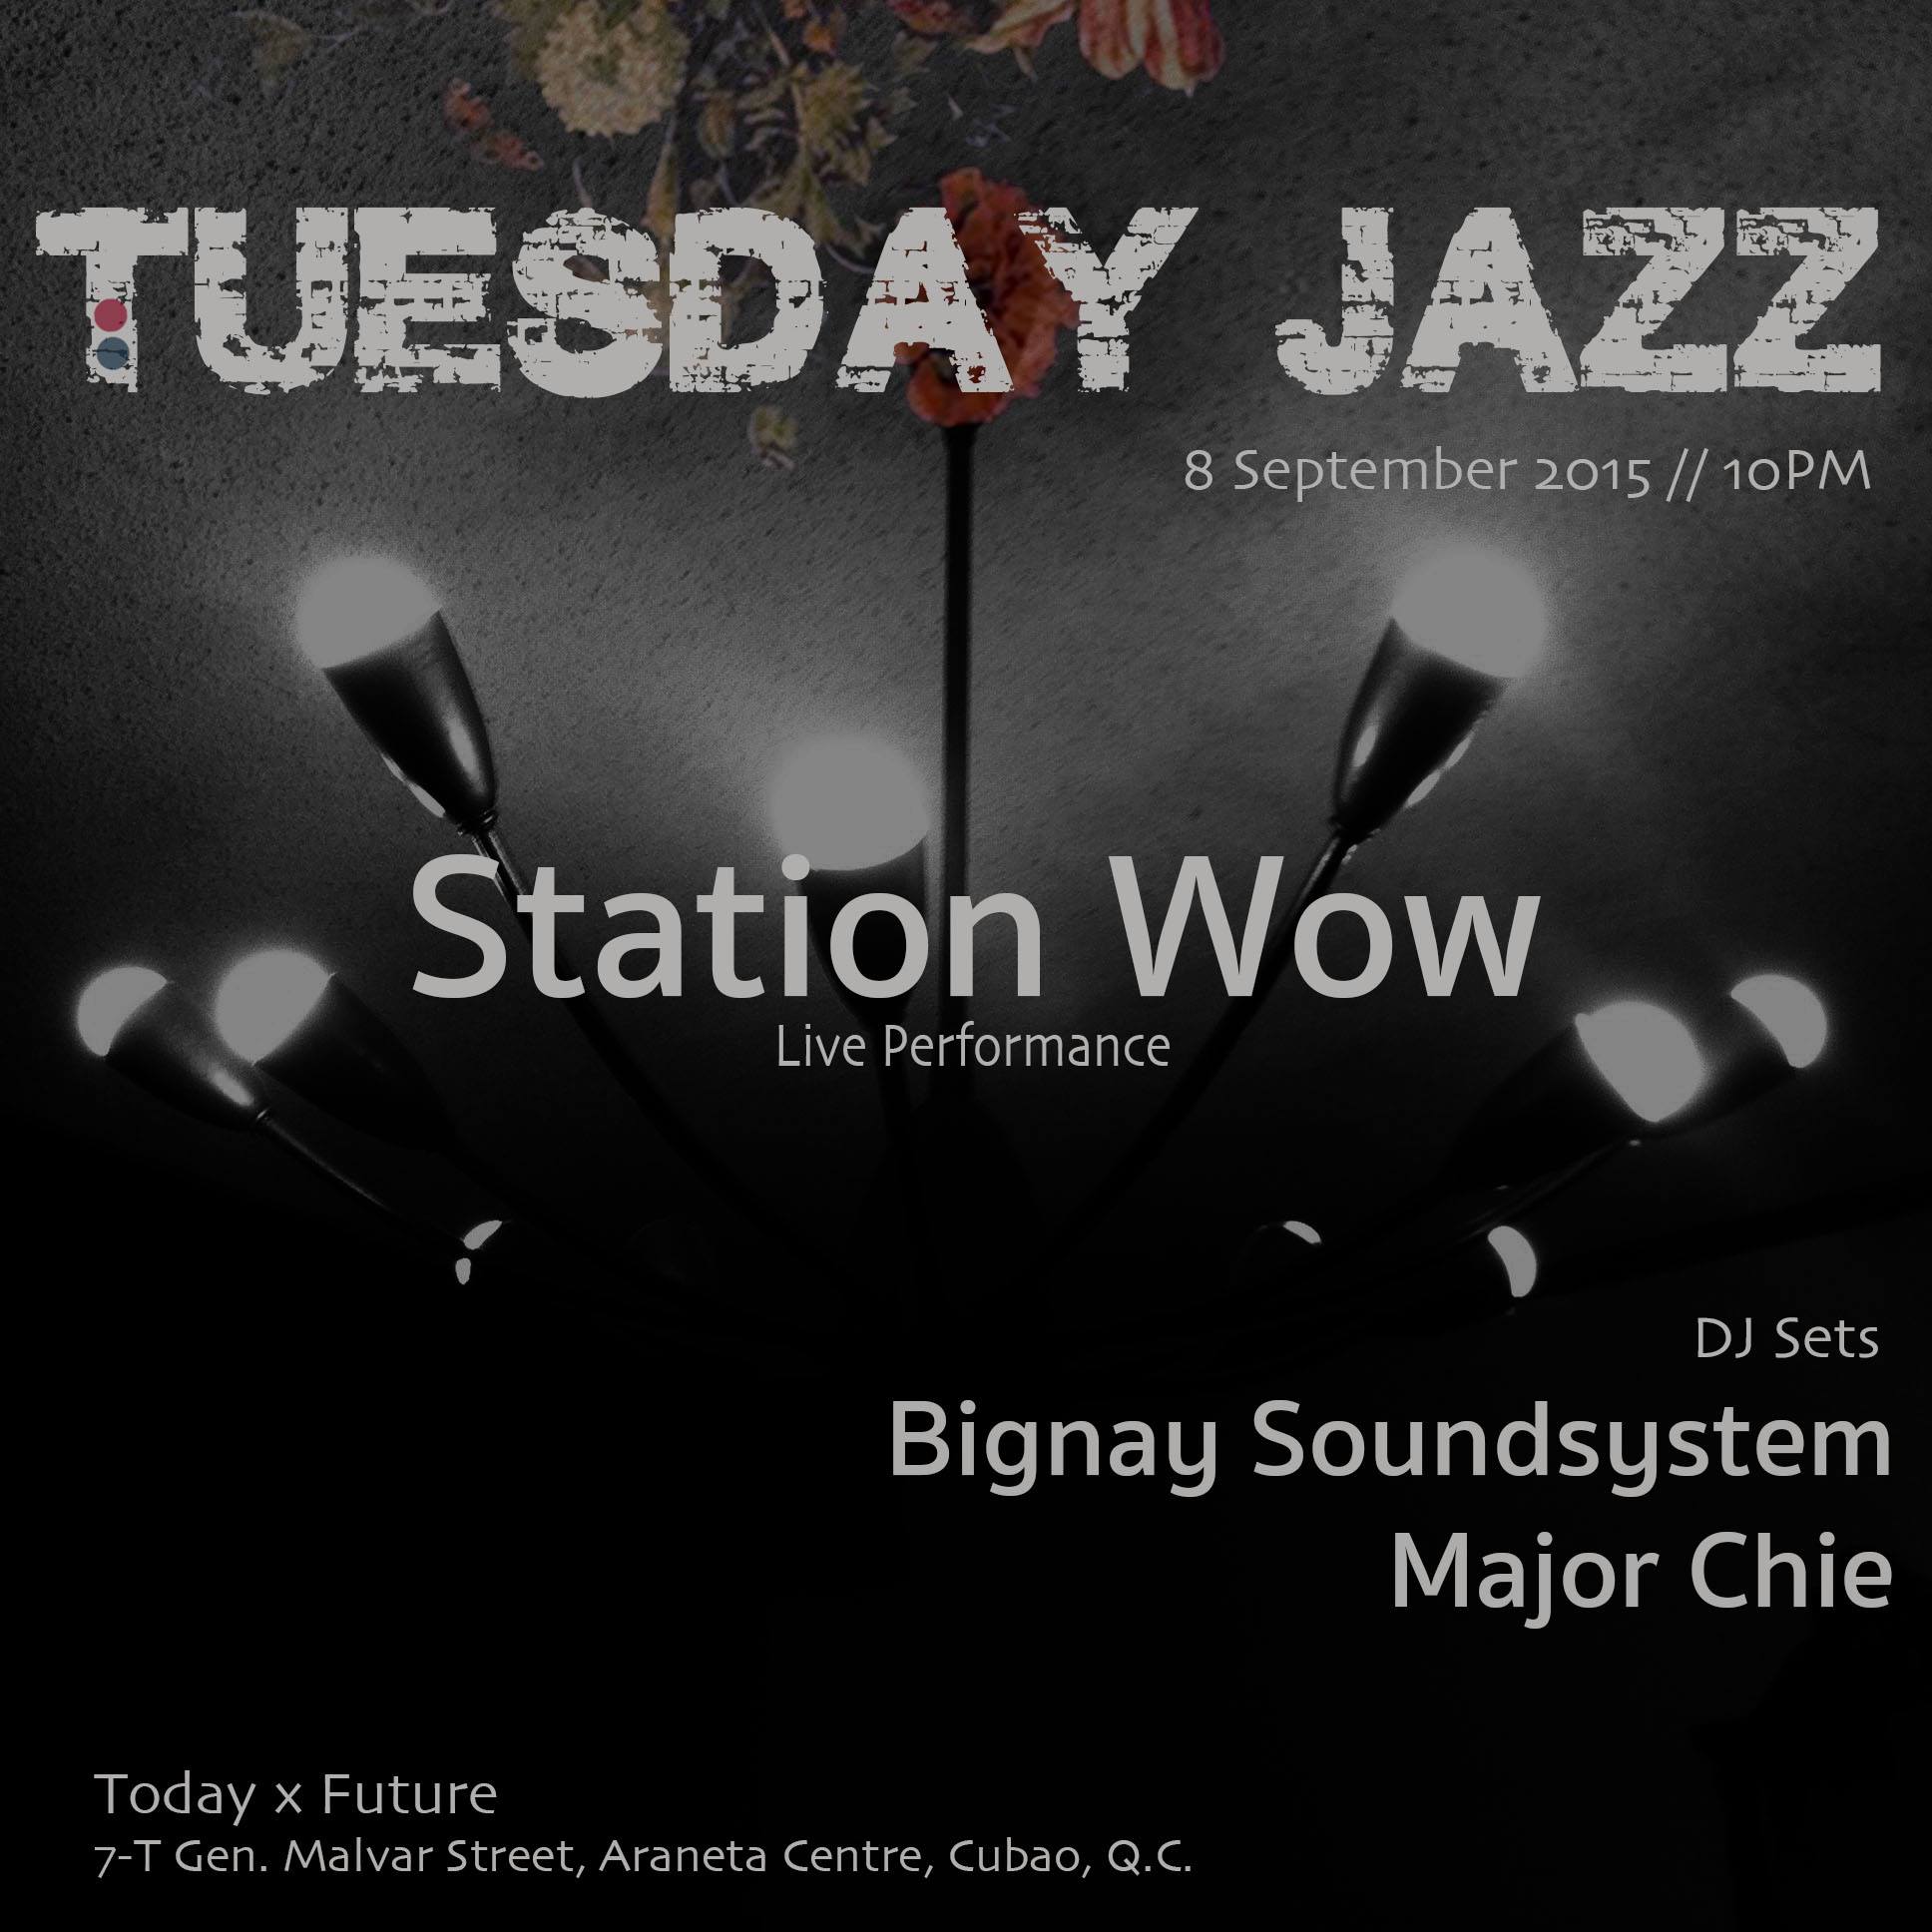 TUESDAY NIGHT JAZZ     Tuesday, September 8     at 10:00pm - 2:00am     Sep 8 at 10:00pm to Sep 9 at 2:00am     	     Show Map     Today x Future     7-T Gen. Malvar St., Araneta Centre, Cubao, Q.C., 1109 Quezon City, Philippines     	     Created for TODAY x FUTURE 8 SEPTEMBER / TODAY X FUTURE / 9PM Come and join us for an extra special edition of TUESDAY NIGHT JAZZ, with your regular cats: STATION WOW (live performance) MAJOR CHI (DJ set) and Radioactive Sago Project's Jay Gapasin & Francis De Veyra aka BIGNAY SOUNDSYSTEM (DJ set) No Cover Charge See you!!